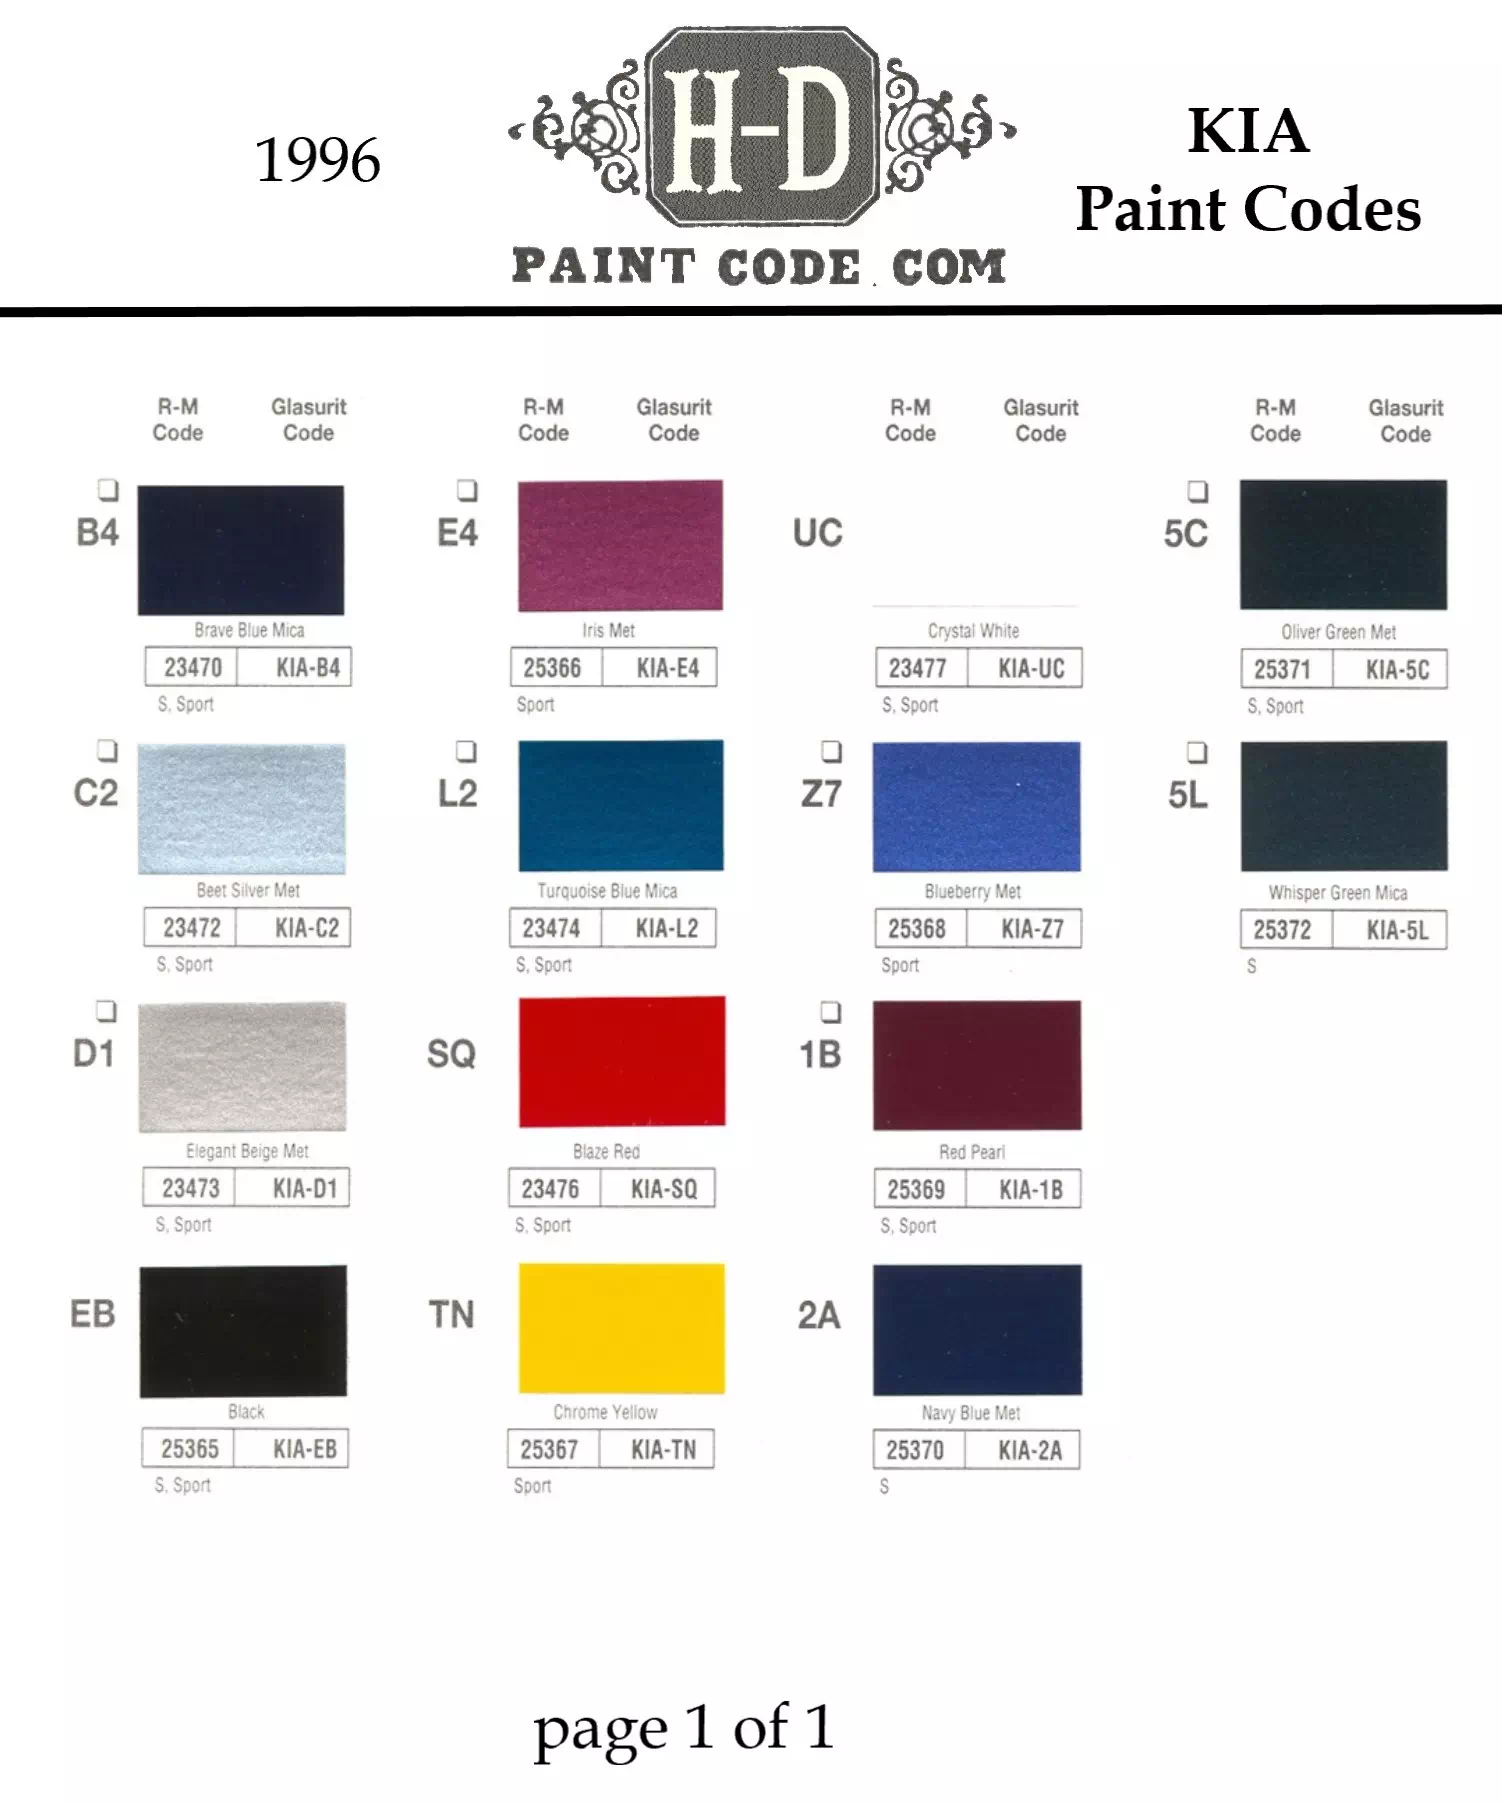 Exterior Colors used on Kia Vehicles in 1996